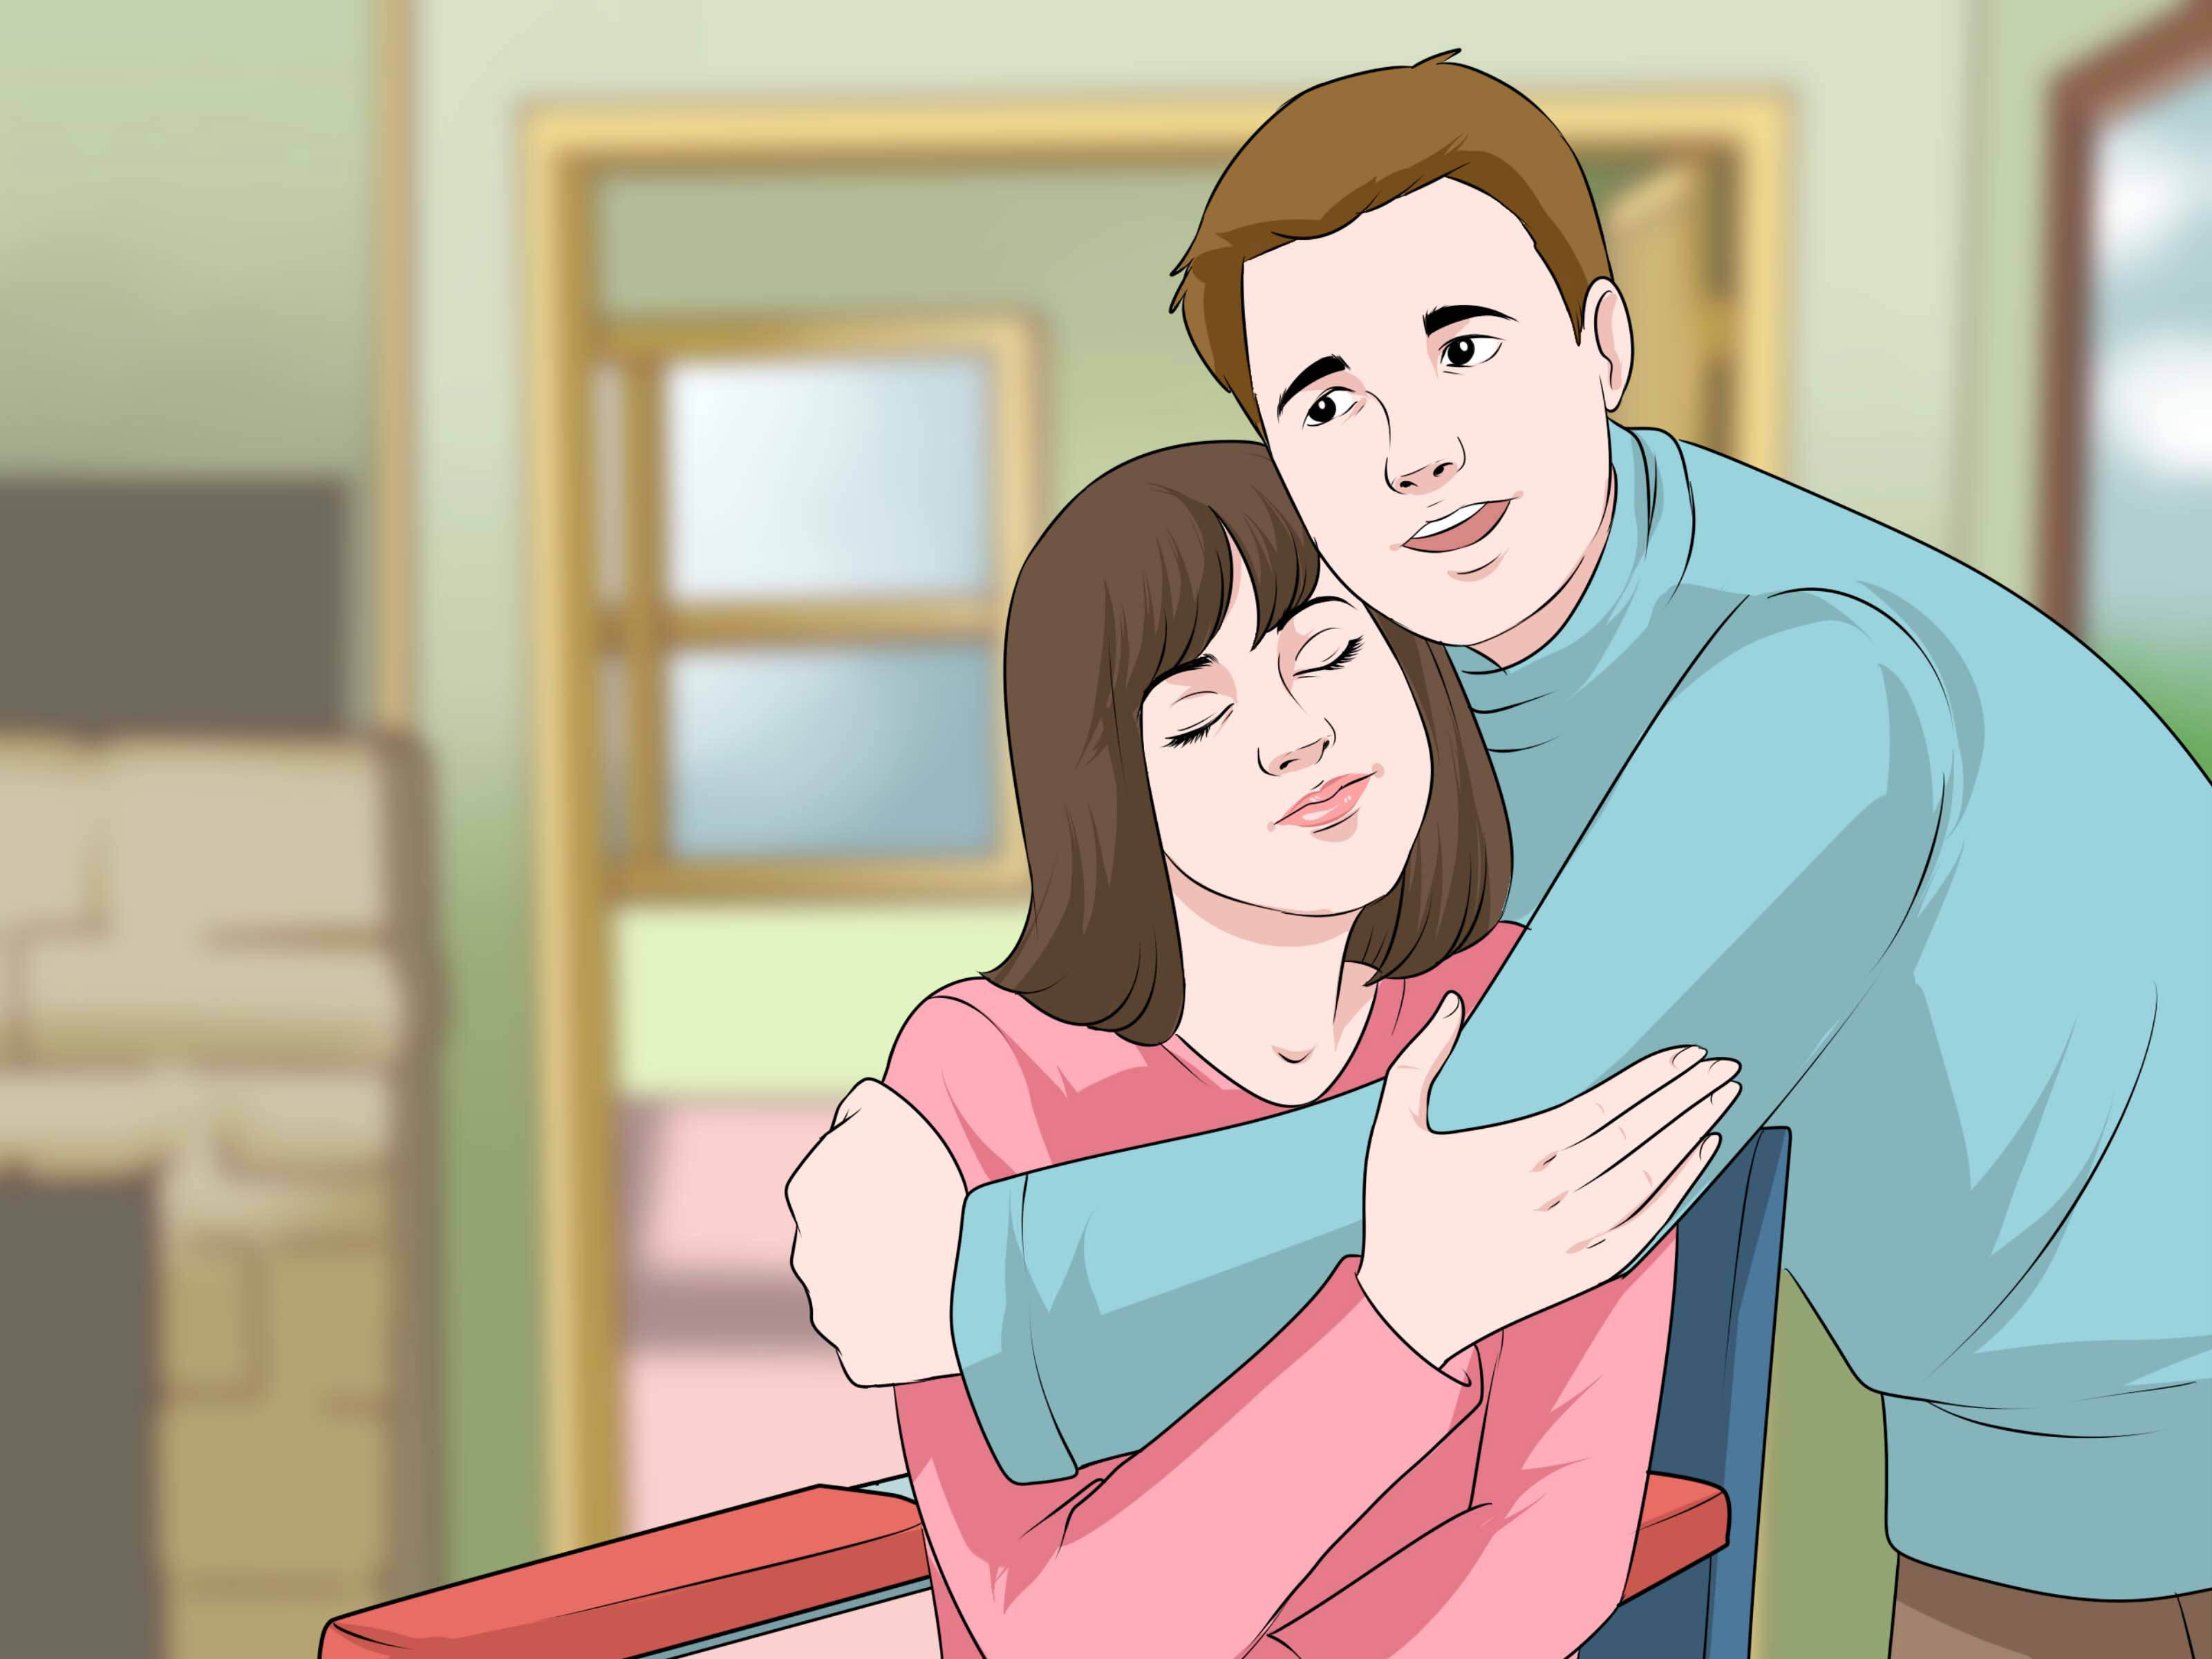 3 Ways to Act and Look Innocent (for Girls) - wikiHow